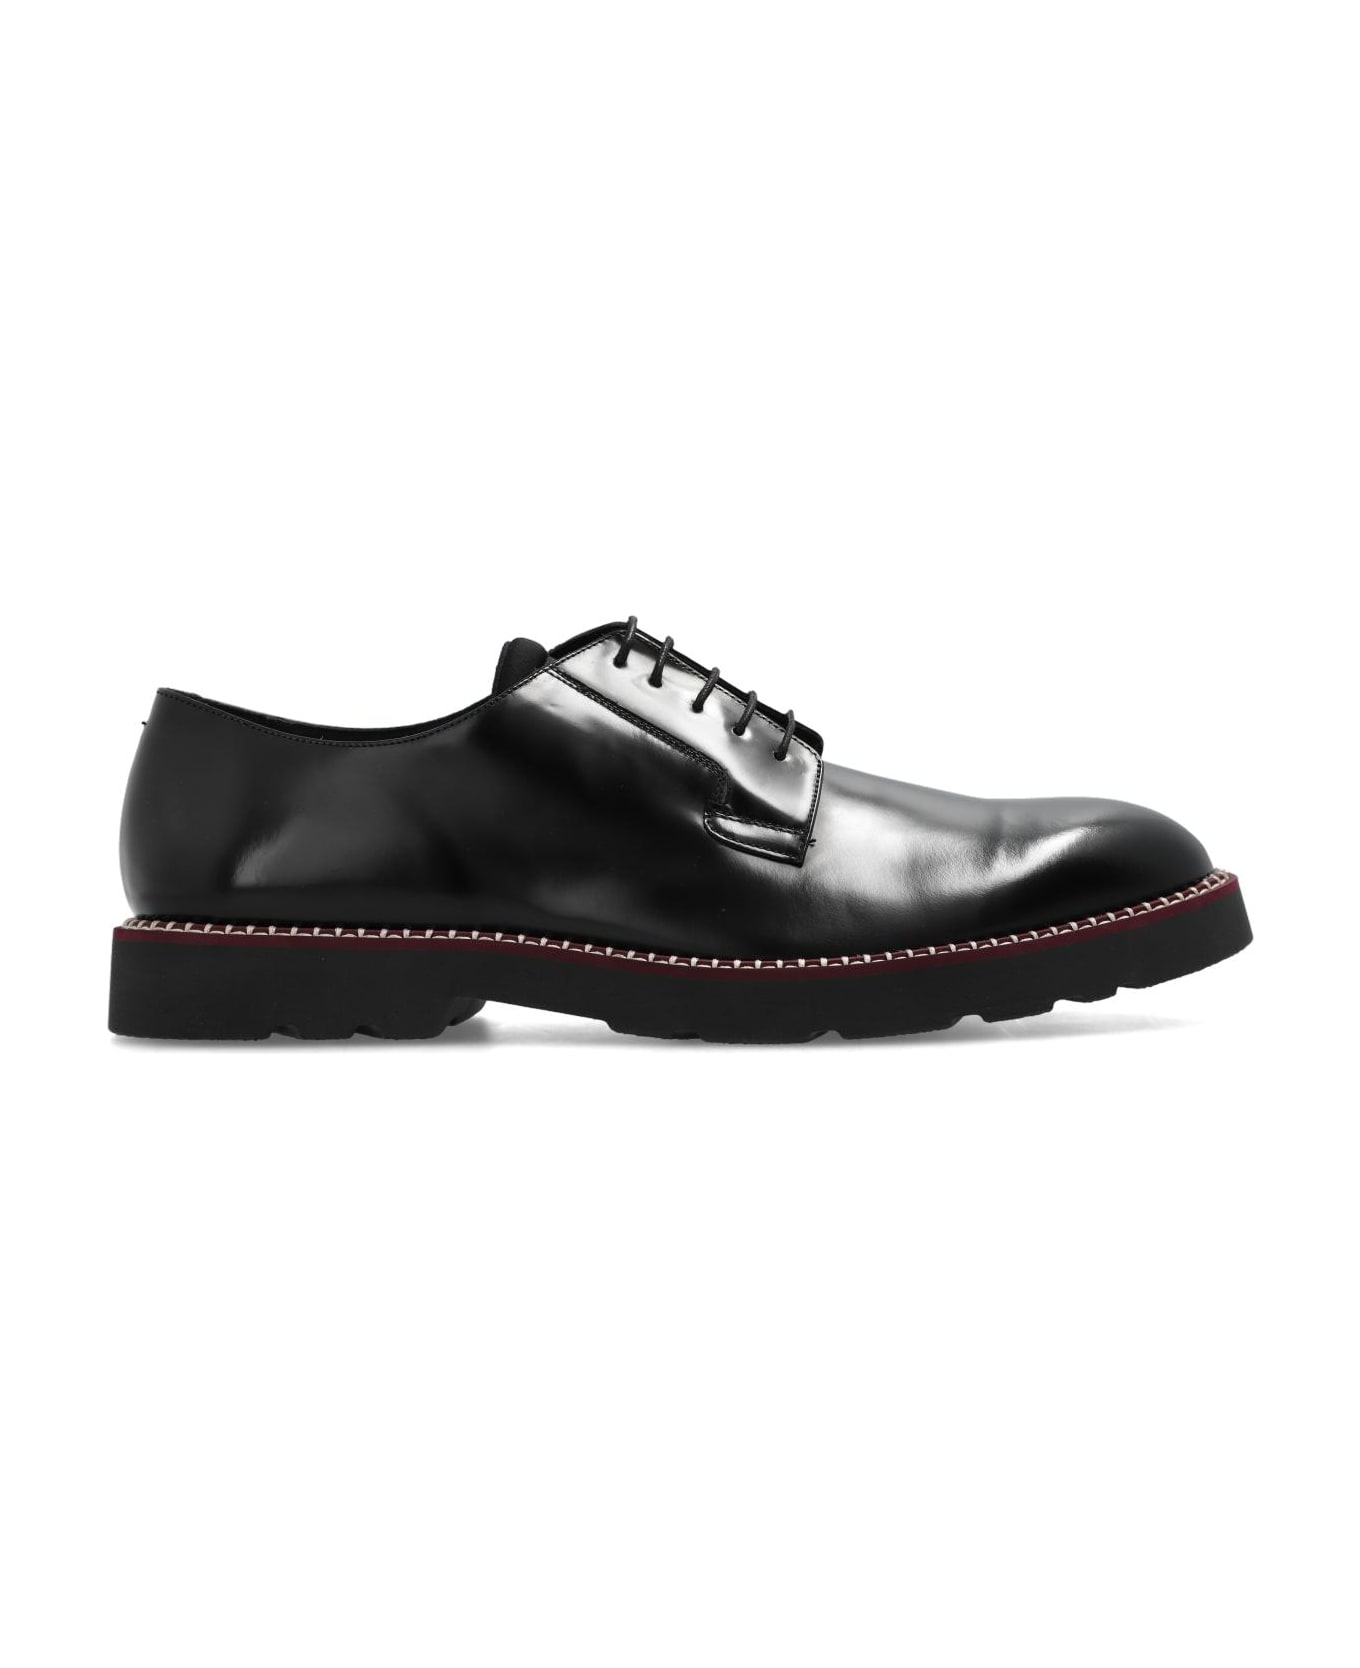 Paul Smith 'ras' Leather Shoes - BLACK ローファー＆デッキシューズ